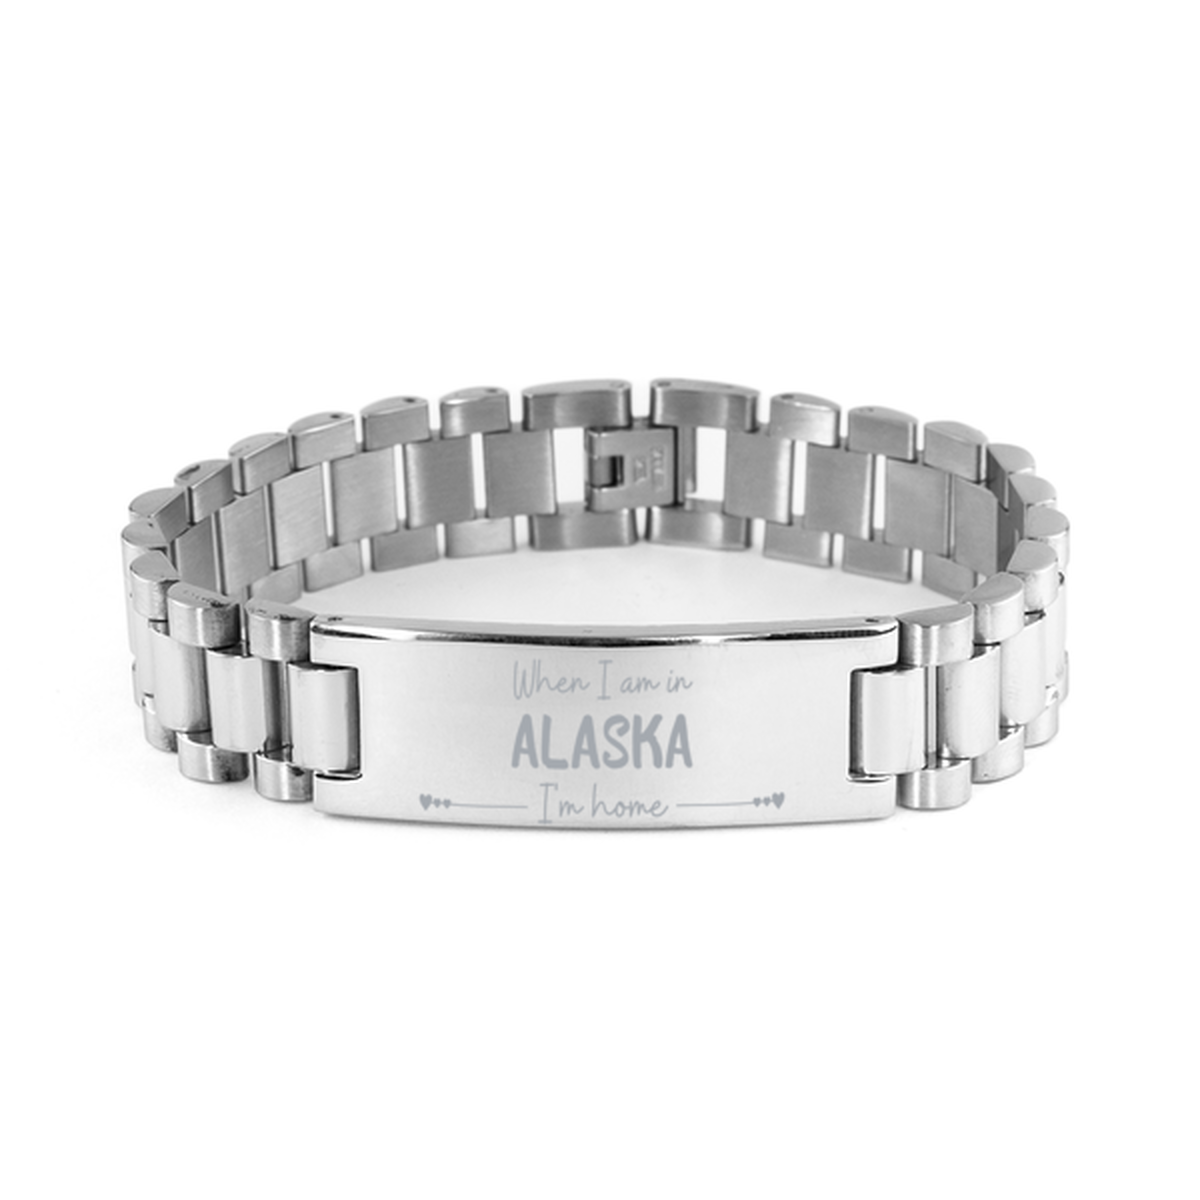 When I am in Alaska I'm home Ladder Stainless Steel Bracelet, Cheap Gifts For Alaska, State Alaska Birthday Gifts for Friends Coworker